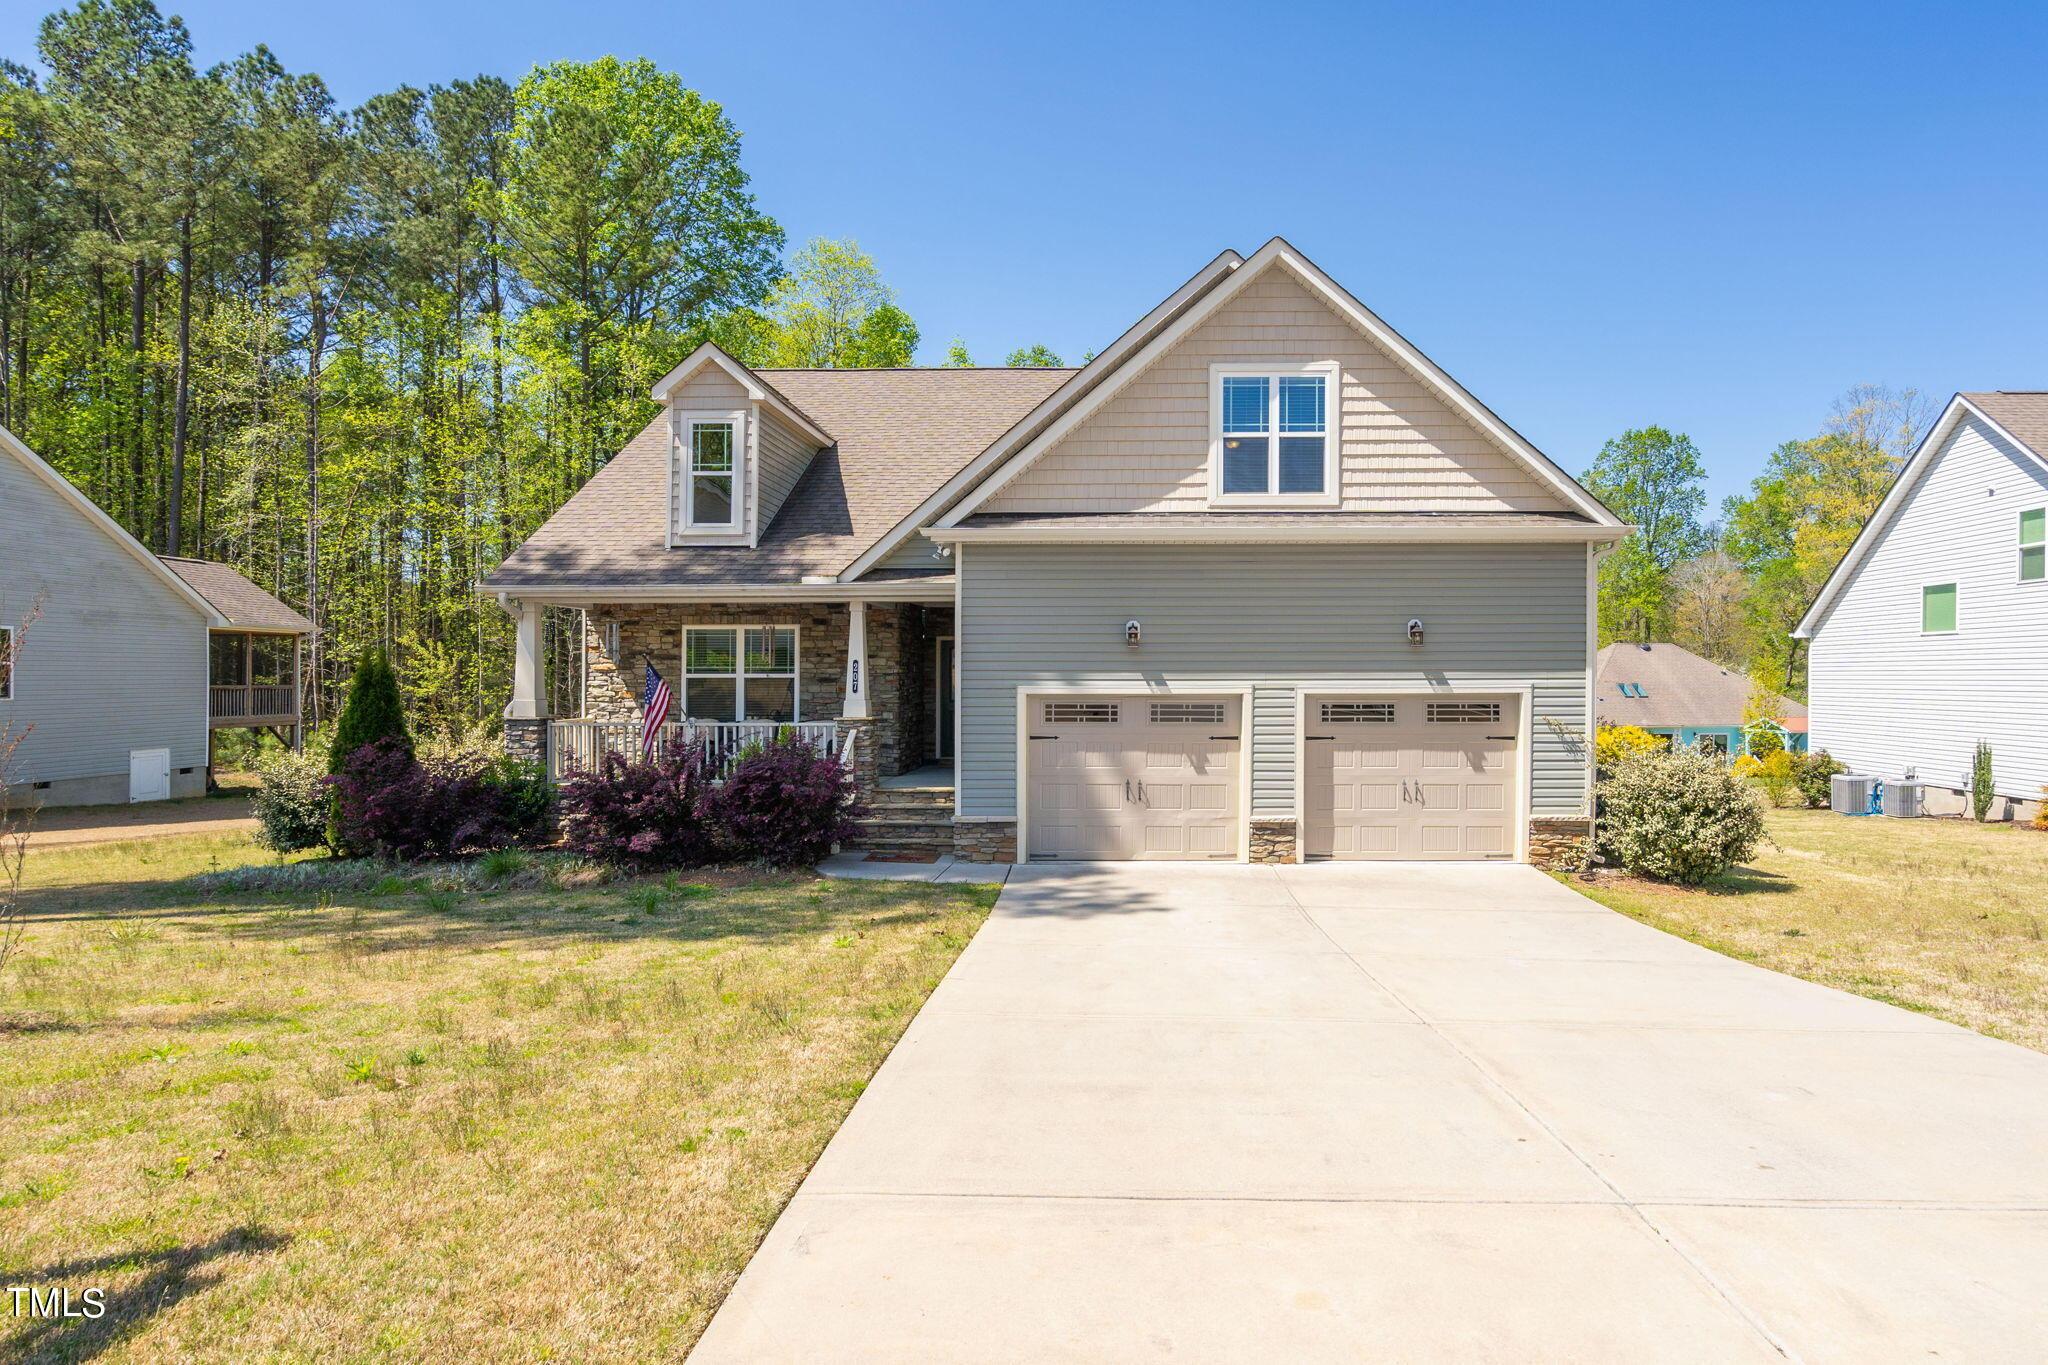 Photo one of 207 Laurel Oaks Drive Youngsville NC 27596 | MLS 10021064